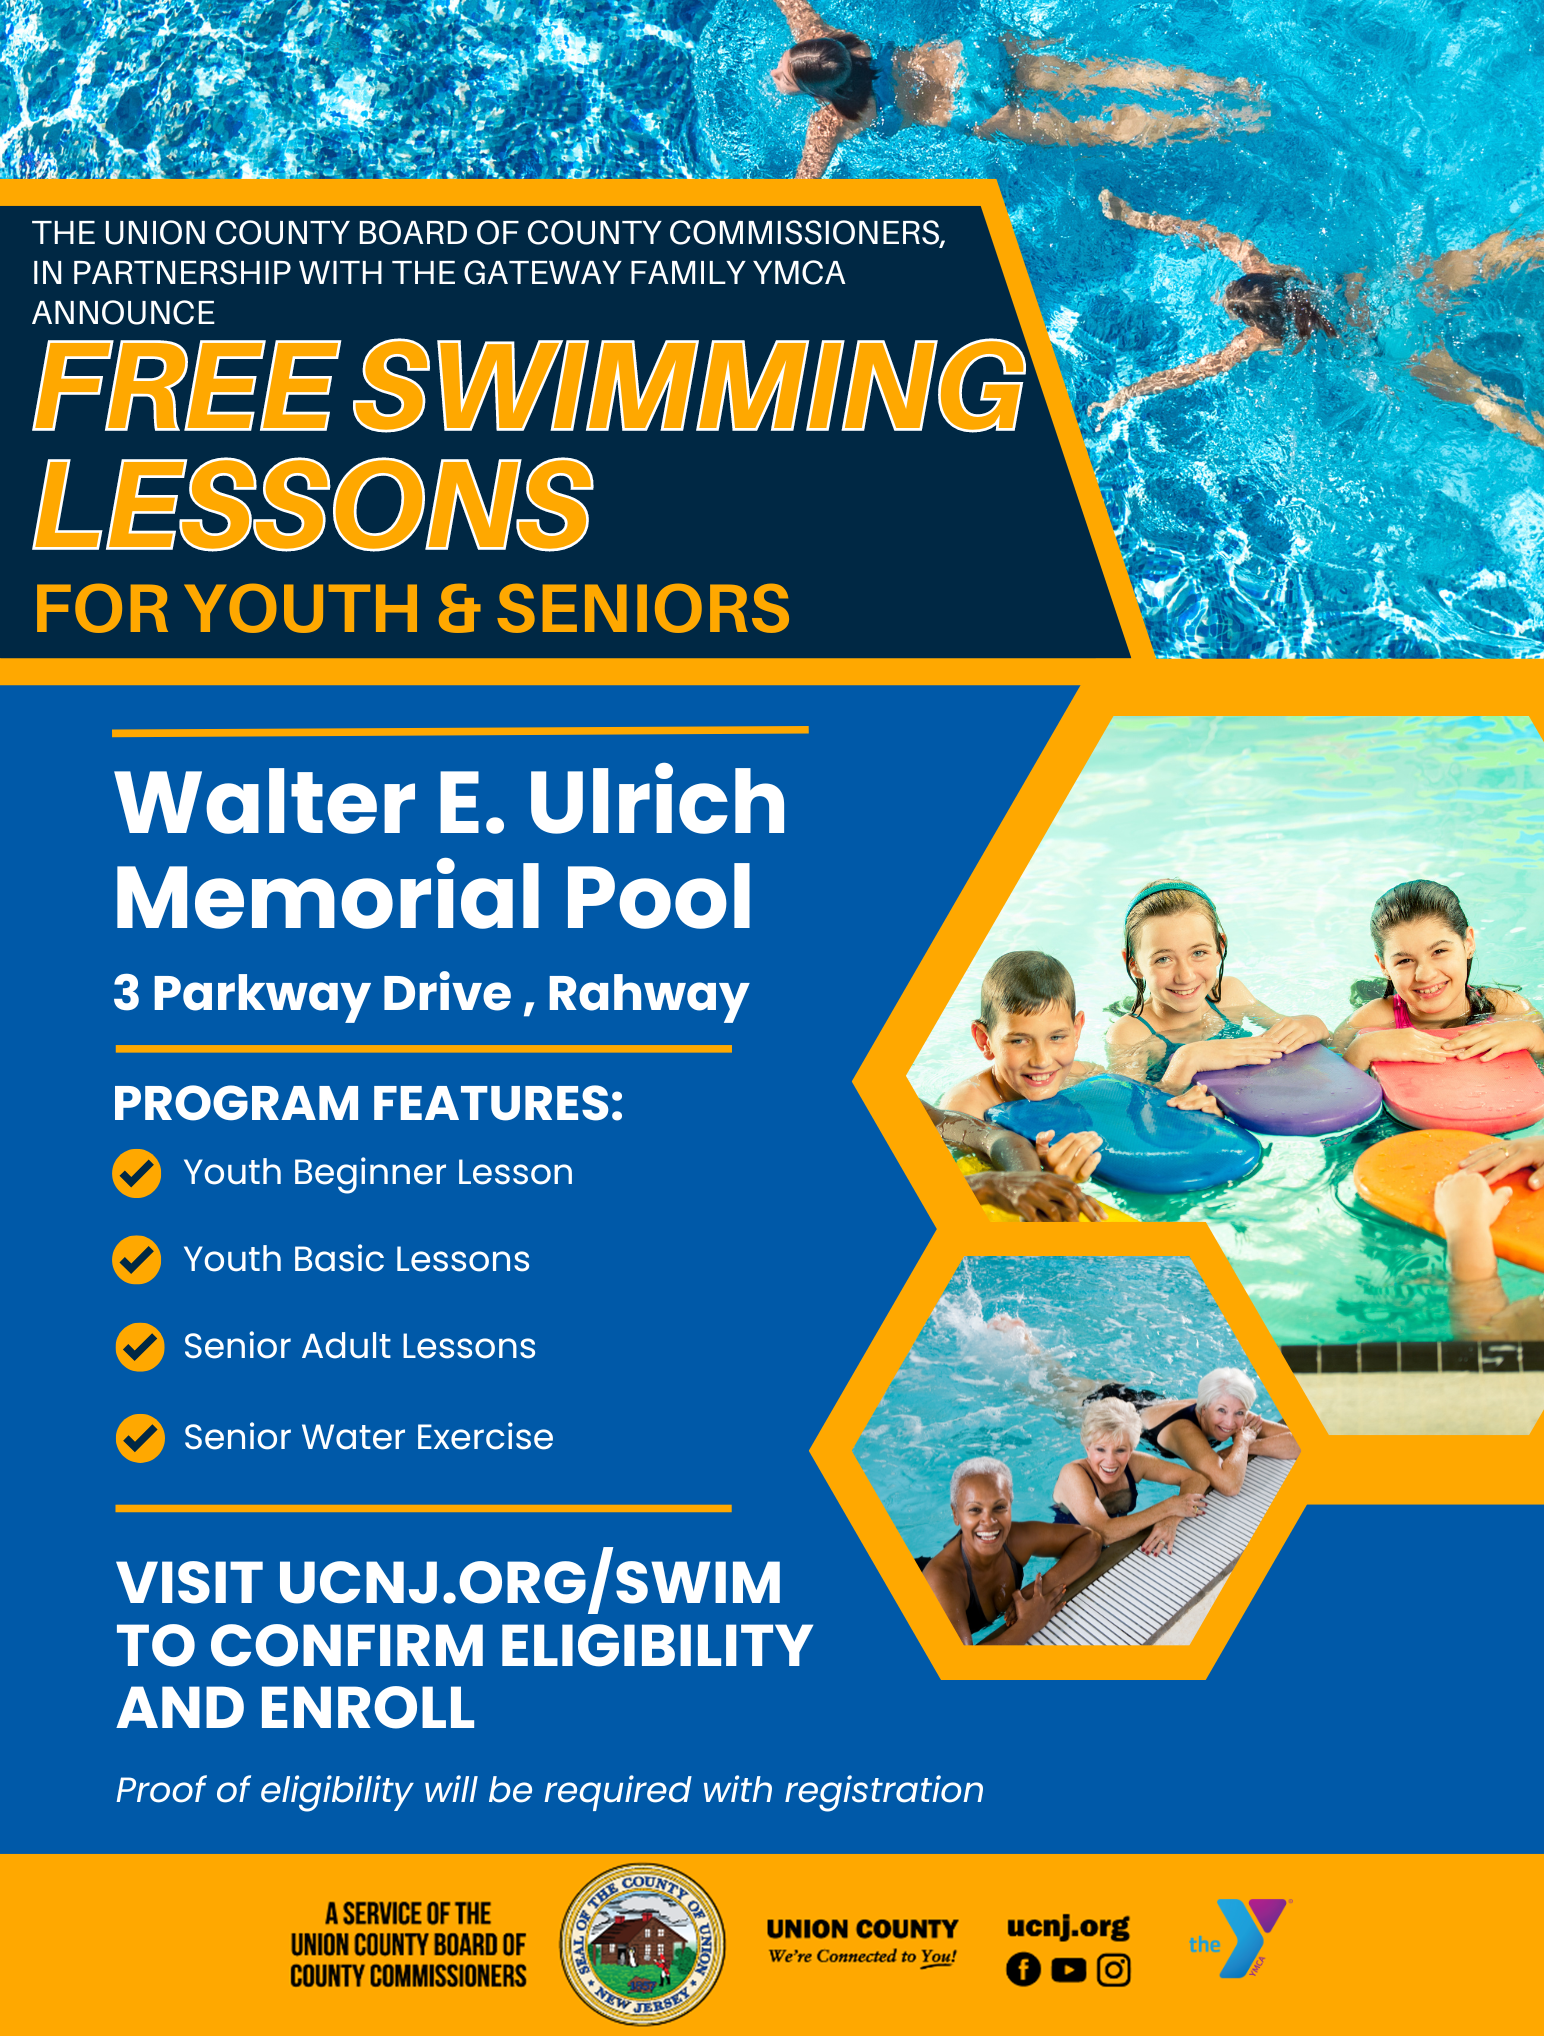 Free Swimming Lessons for Children and Seniors returns to Union County this Summer